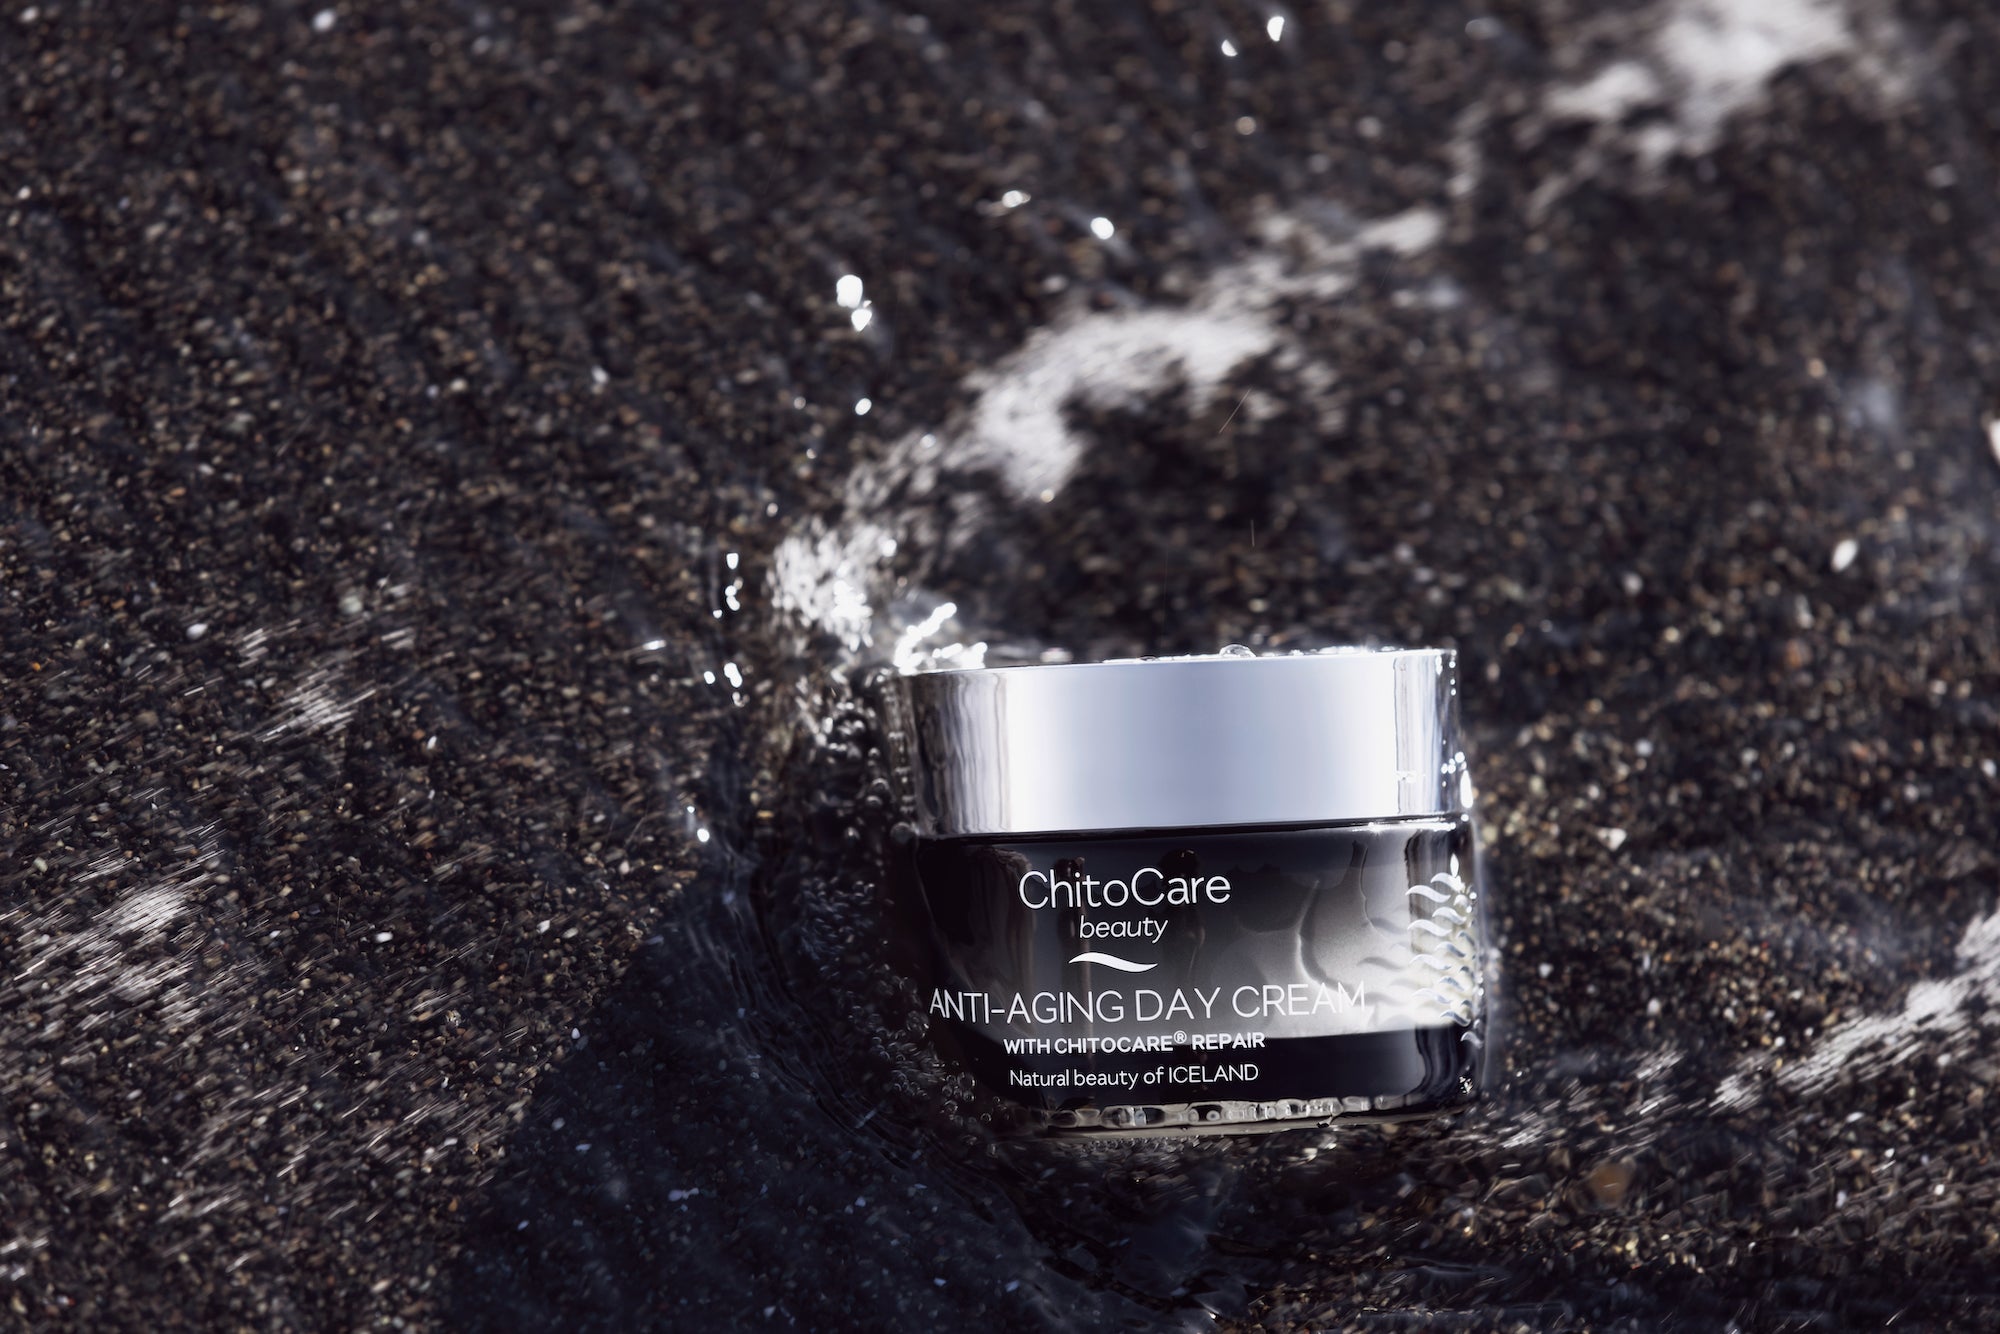 ChitoCare Beauty Anti-Aging Day Cream